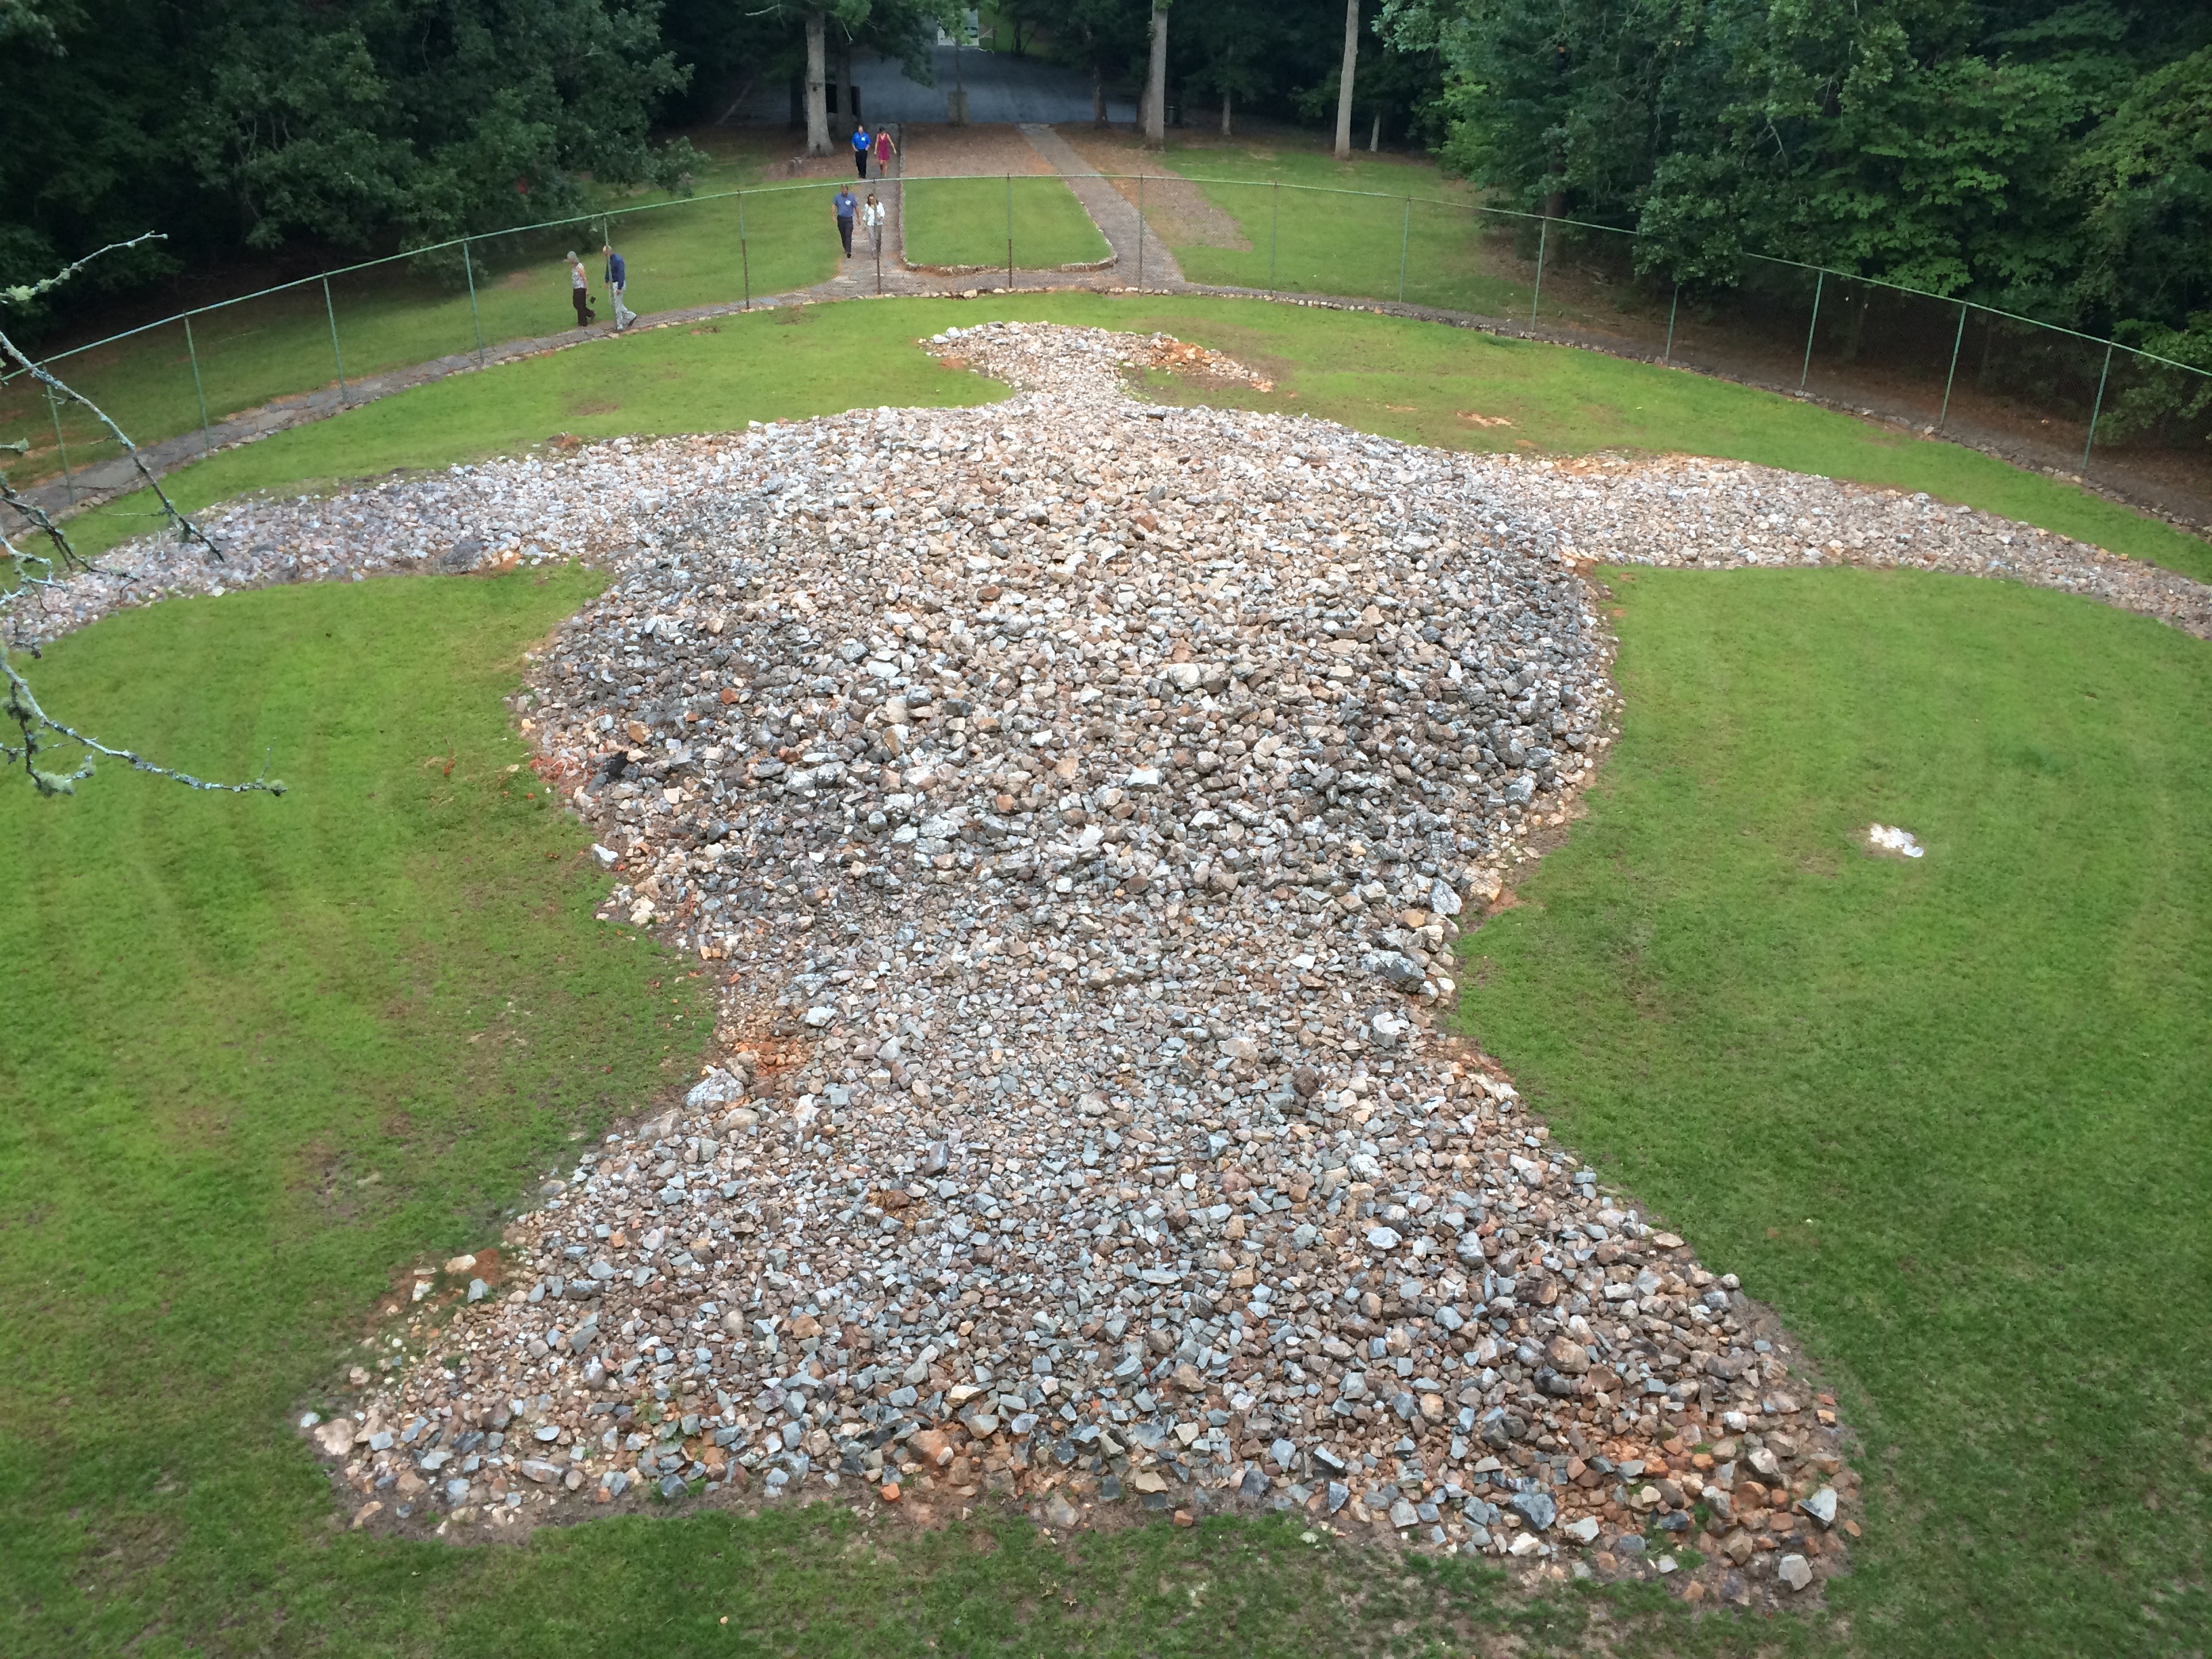 Native Americans built the Rock Eagle Effigy mound between 100-300 A.D.  The public is invited to learn more about the 120-foot wide eagle at a public history hike on Nov. 21.